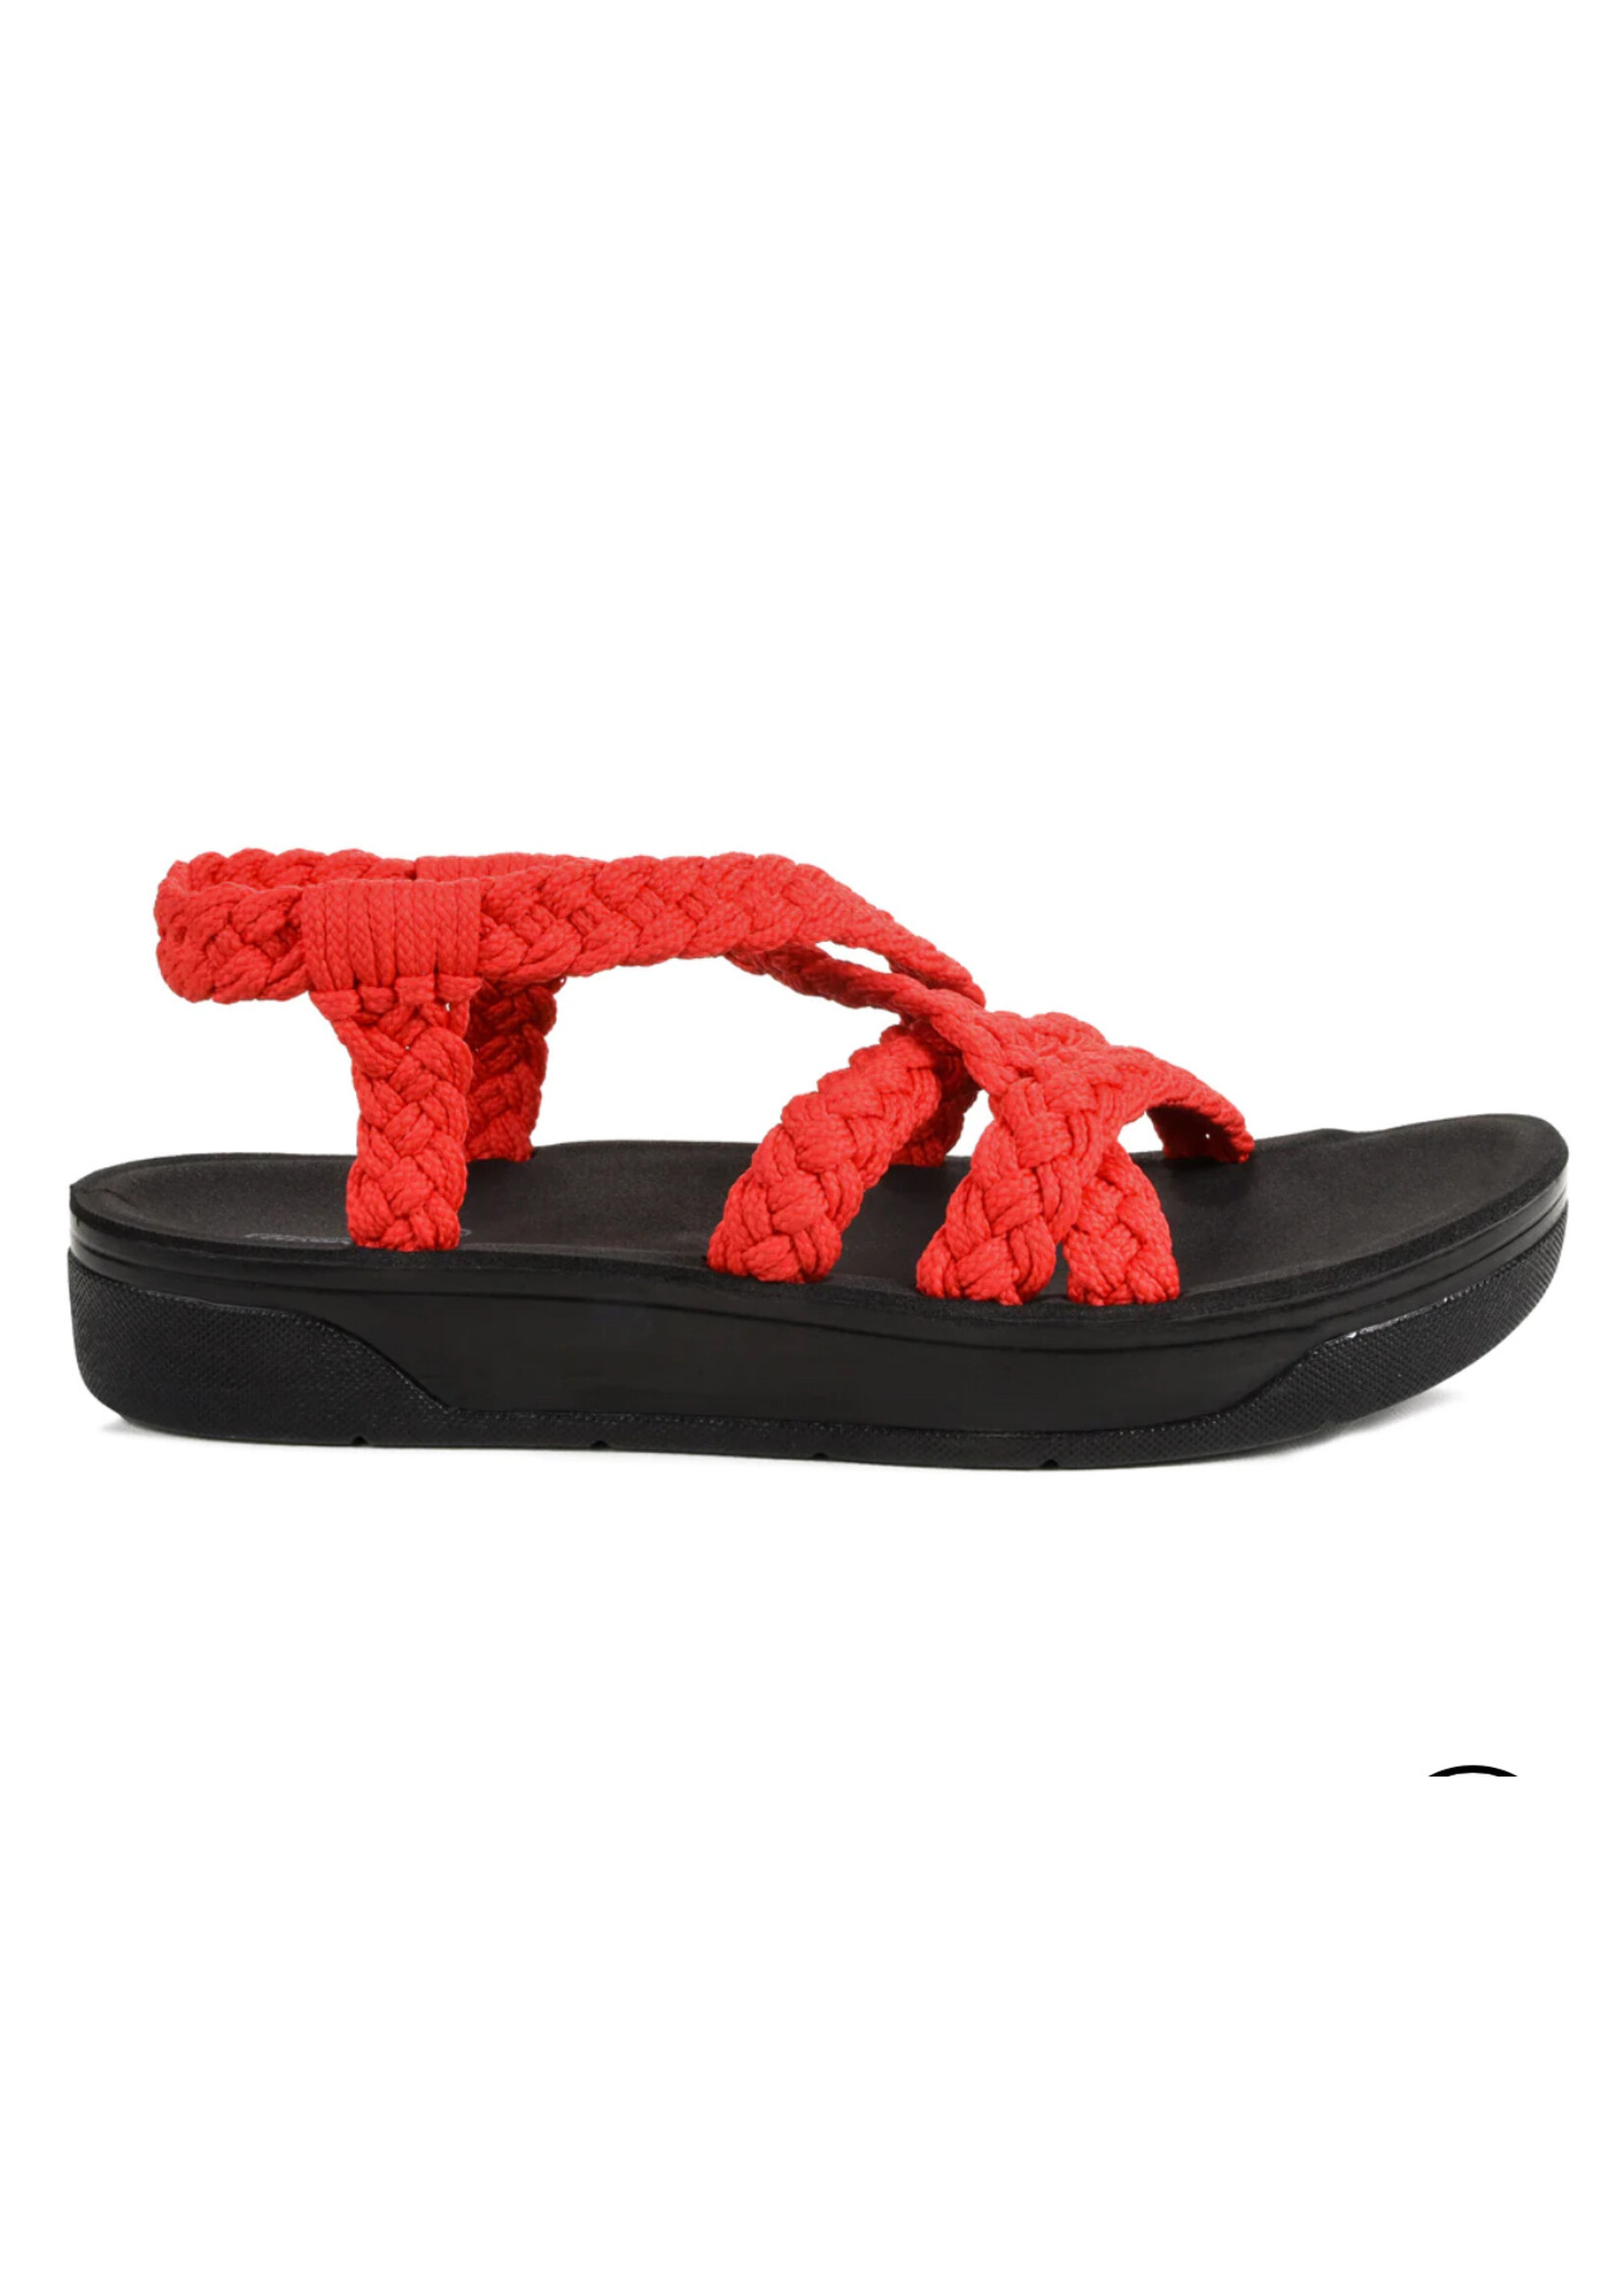 On To New Adventures Sandal in Red